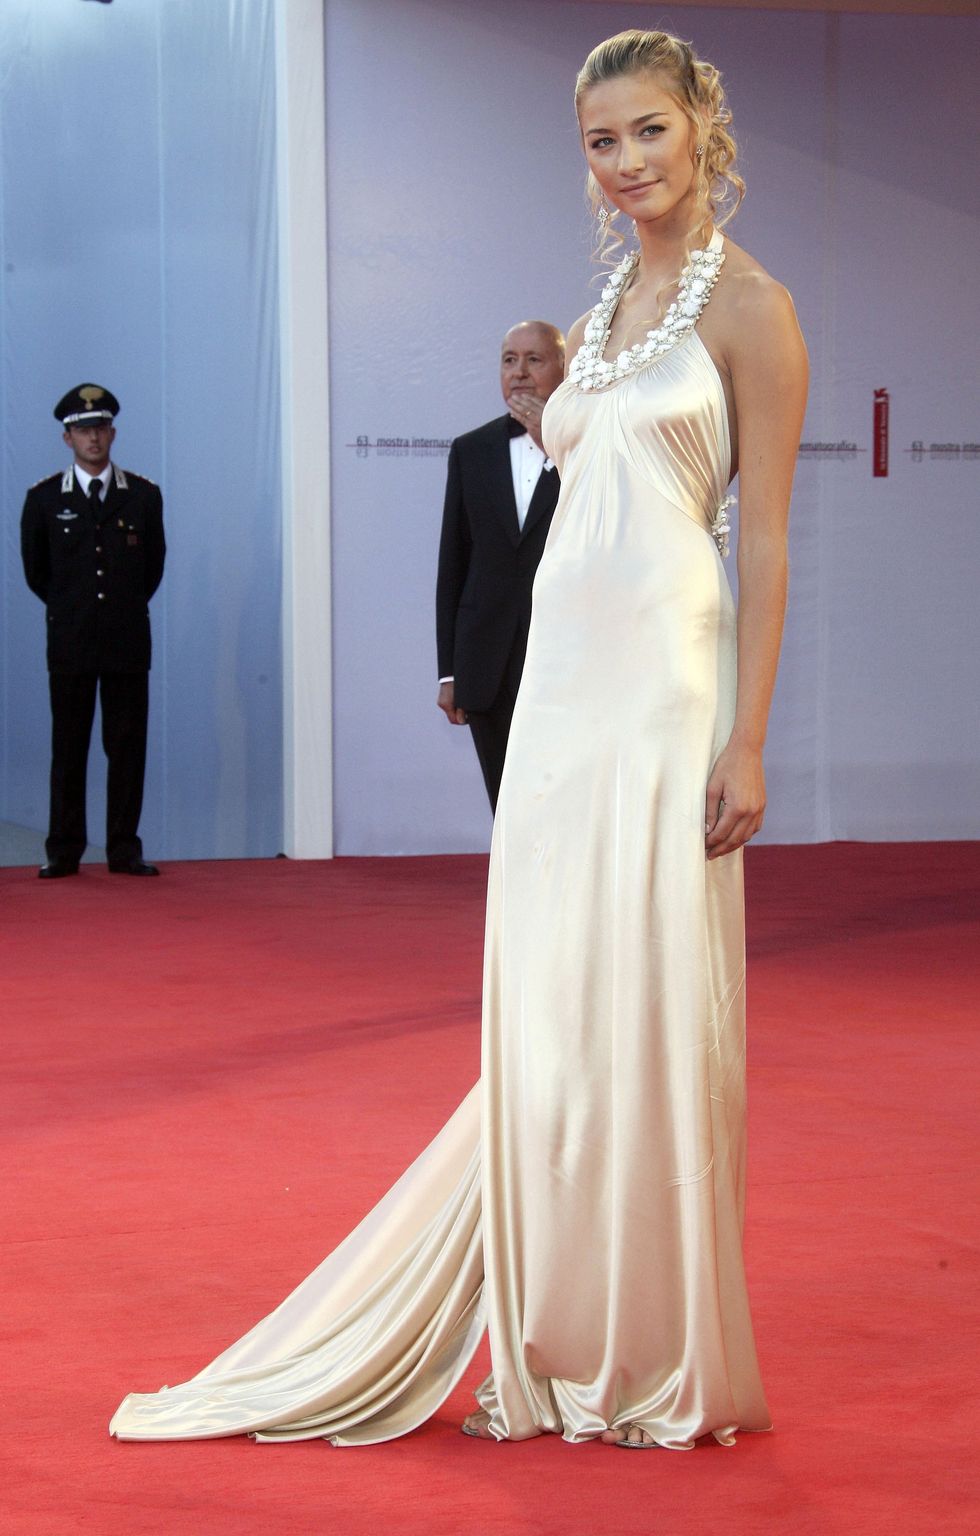 venice, italy august 30 italian model beatrice borromeo arrives at the opening ceremony and the black dahlia premiere on the first day of the 63rd venice film festival on august 30, 2006 in venice, italy photo by pascal le segretaingetty images